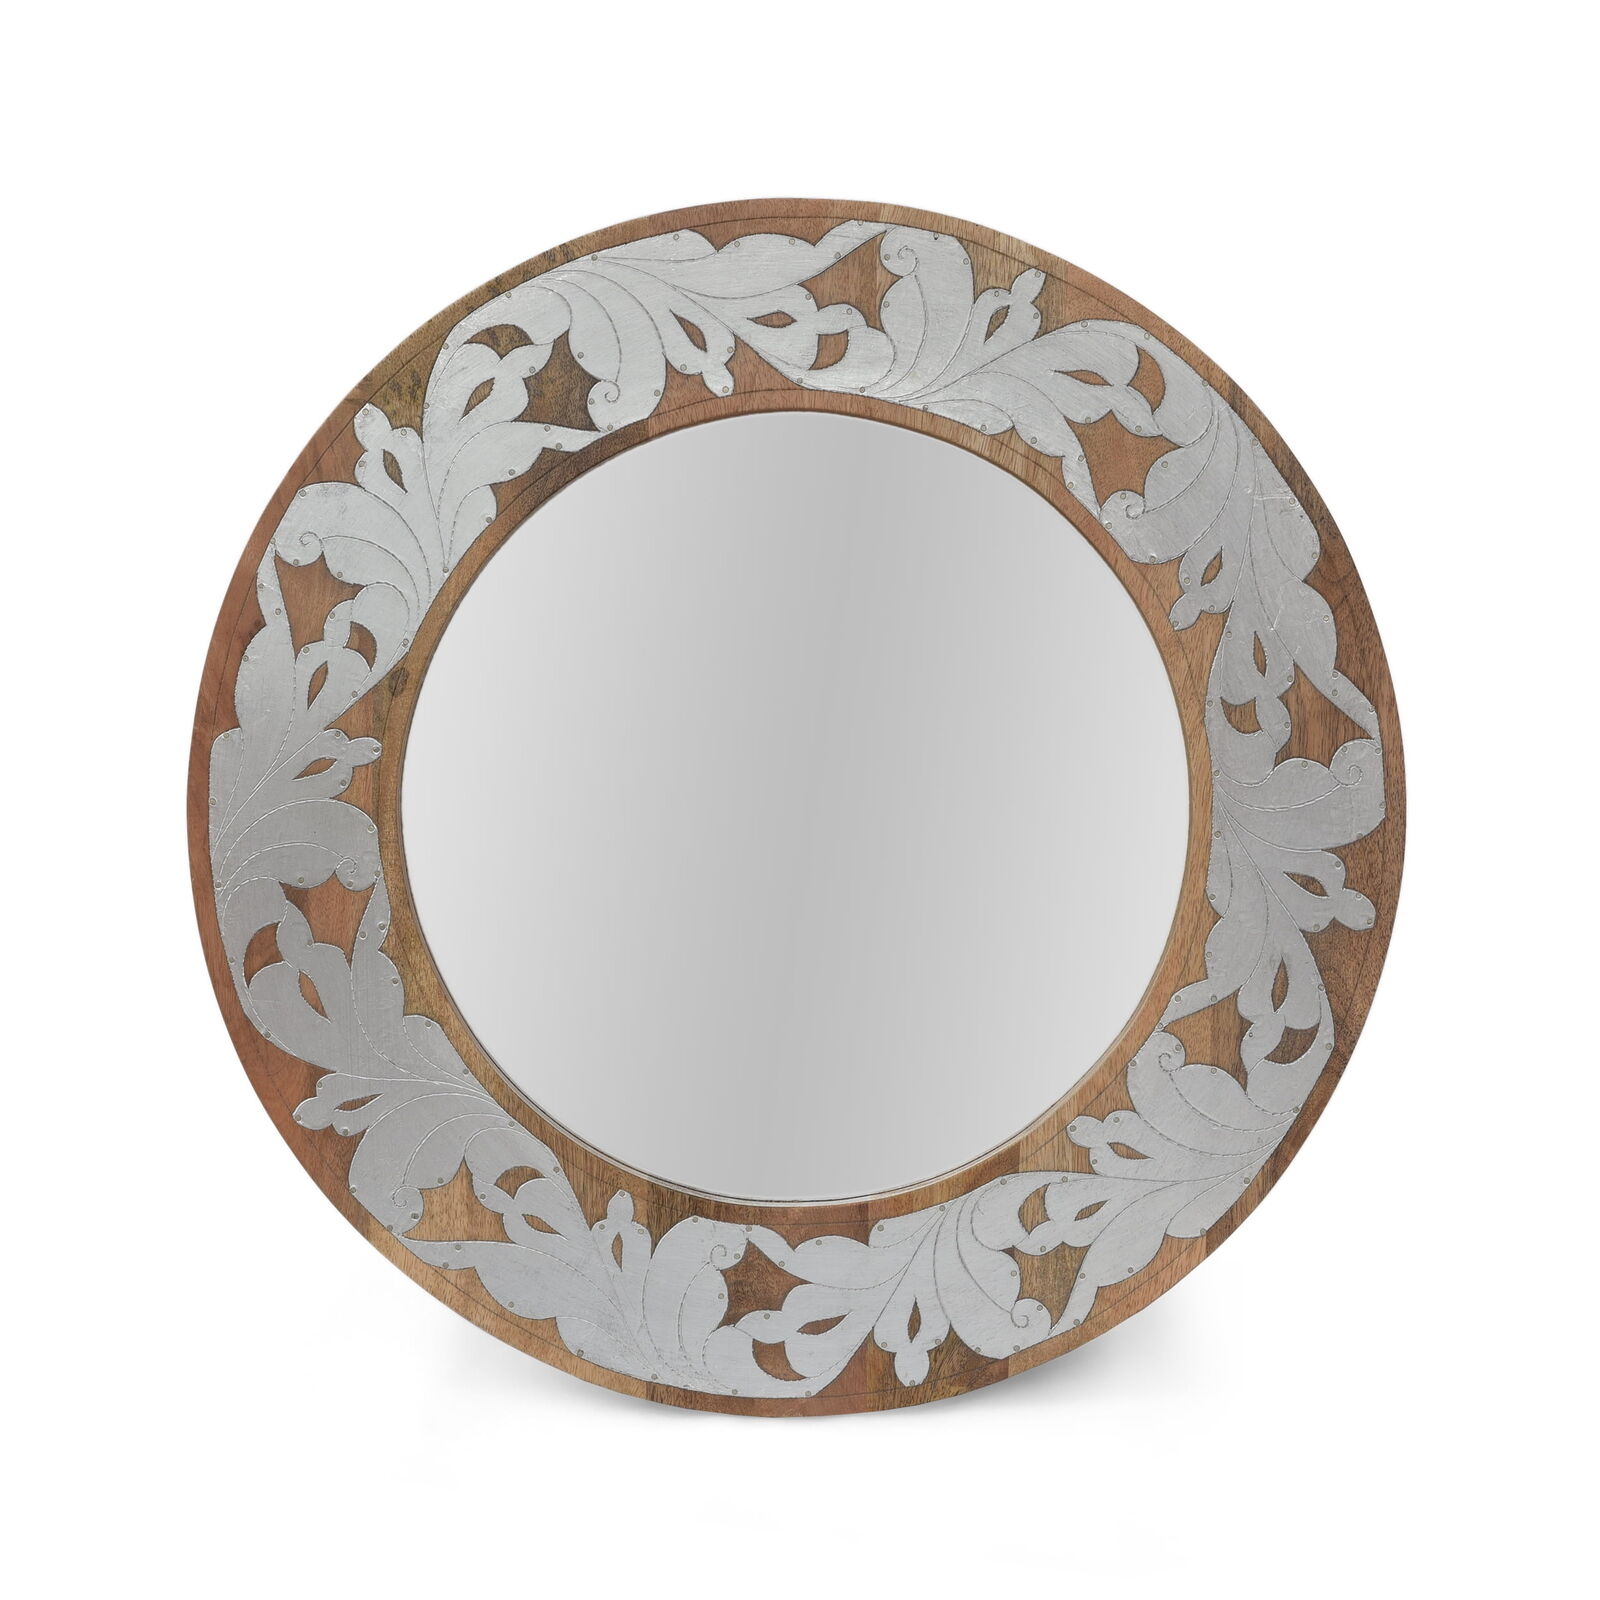 Handcrafted Mango Wood Aluminum Fitted Round Mirror, Natural and Antique Silver Unbranded